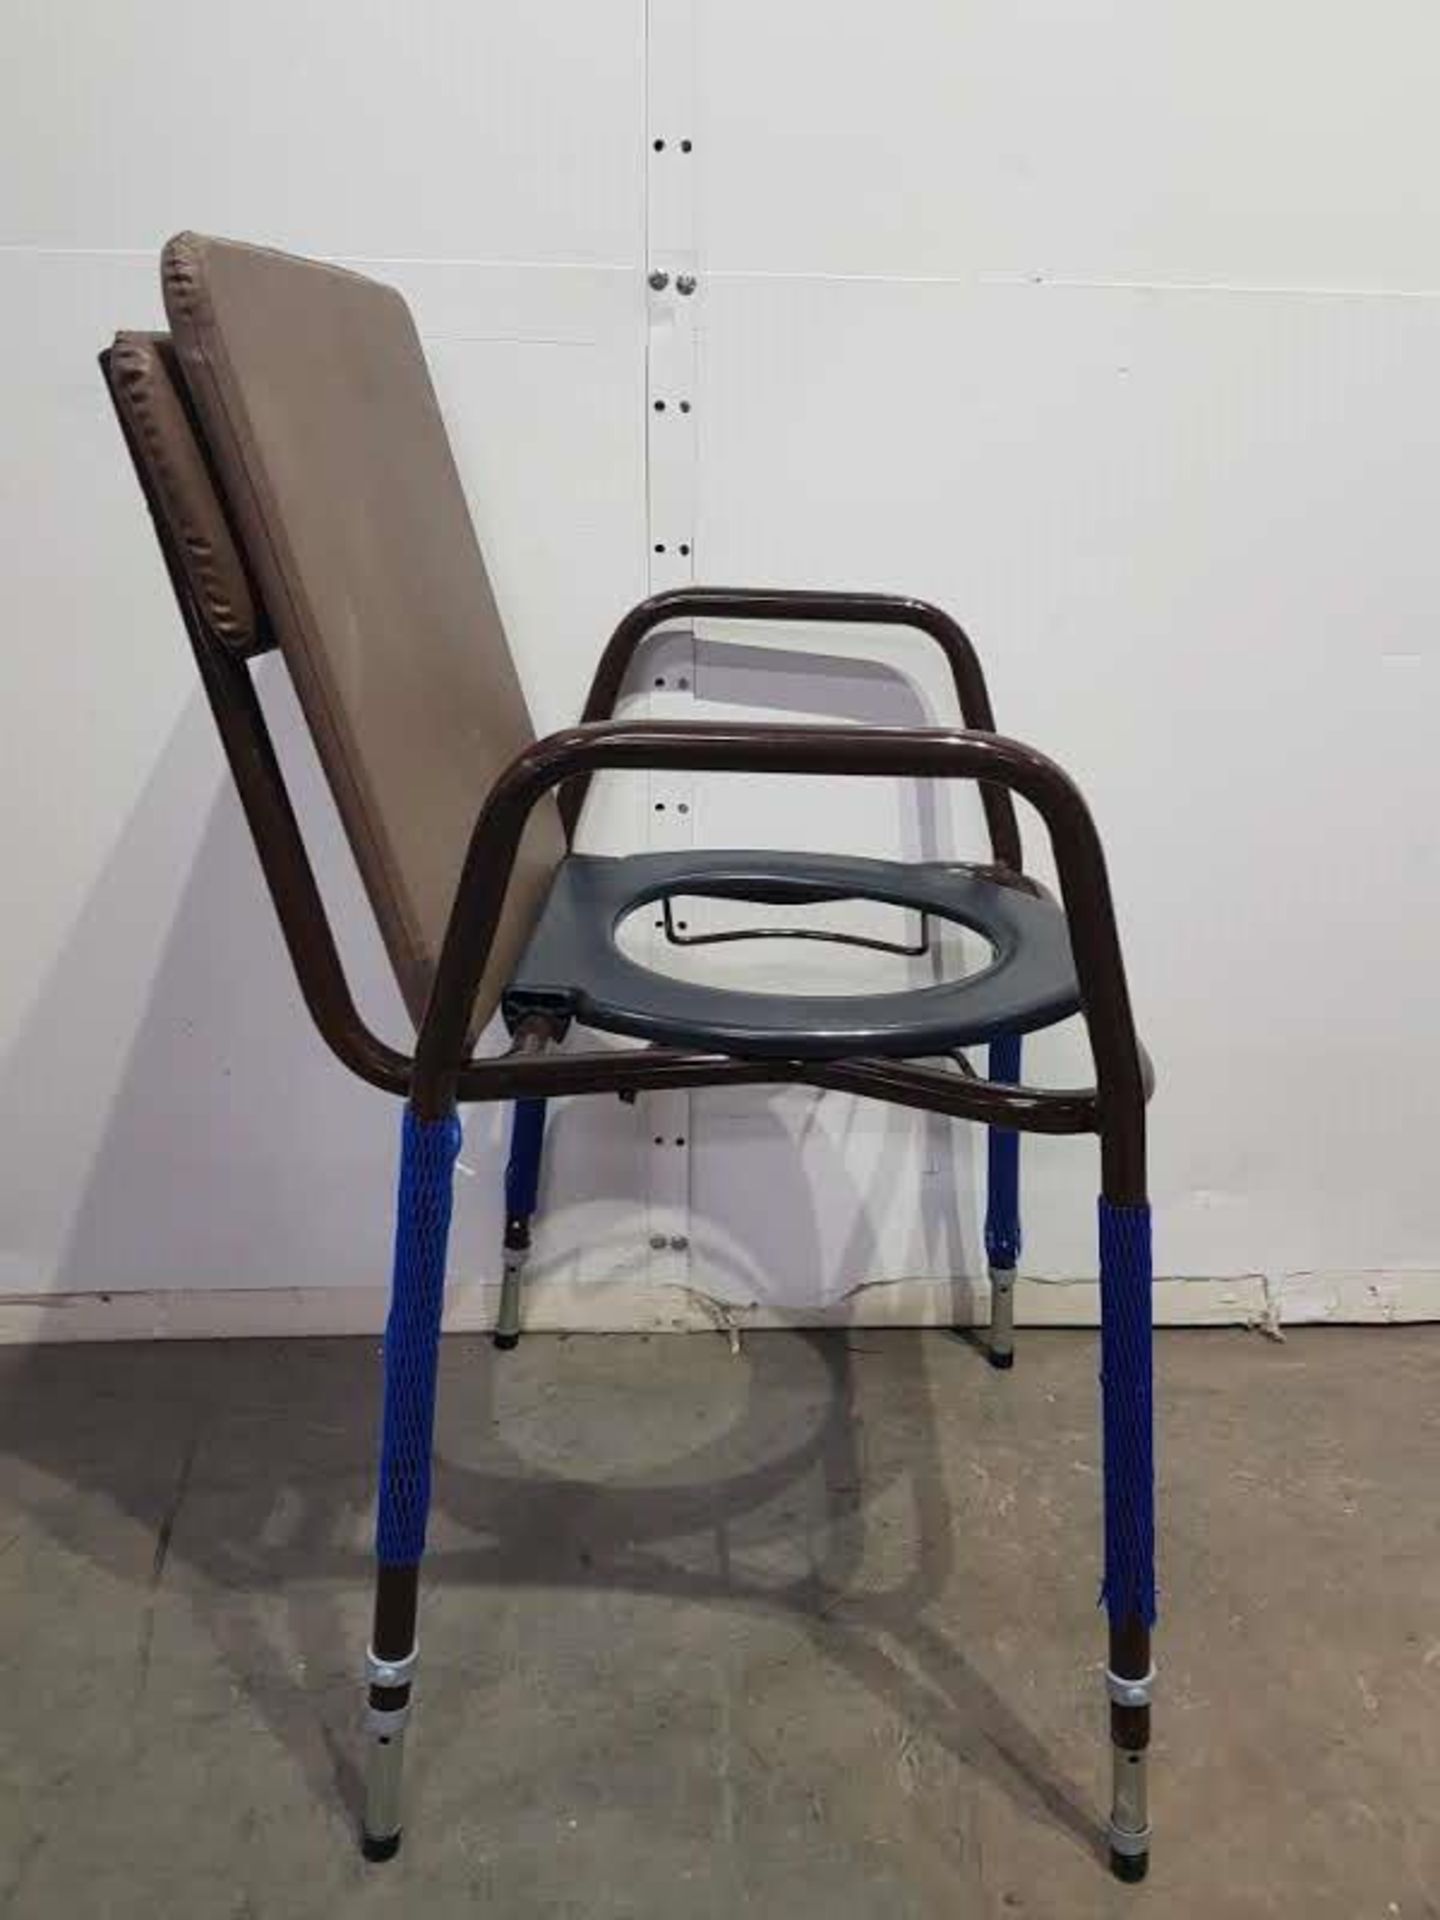 Cefindy Toilet Chair Height Adjustable - Image 3 of 5